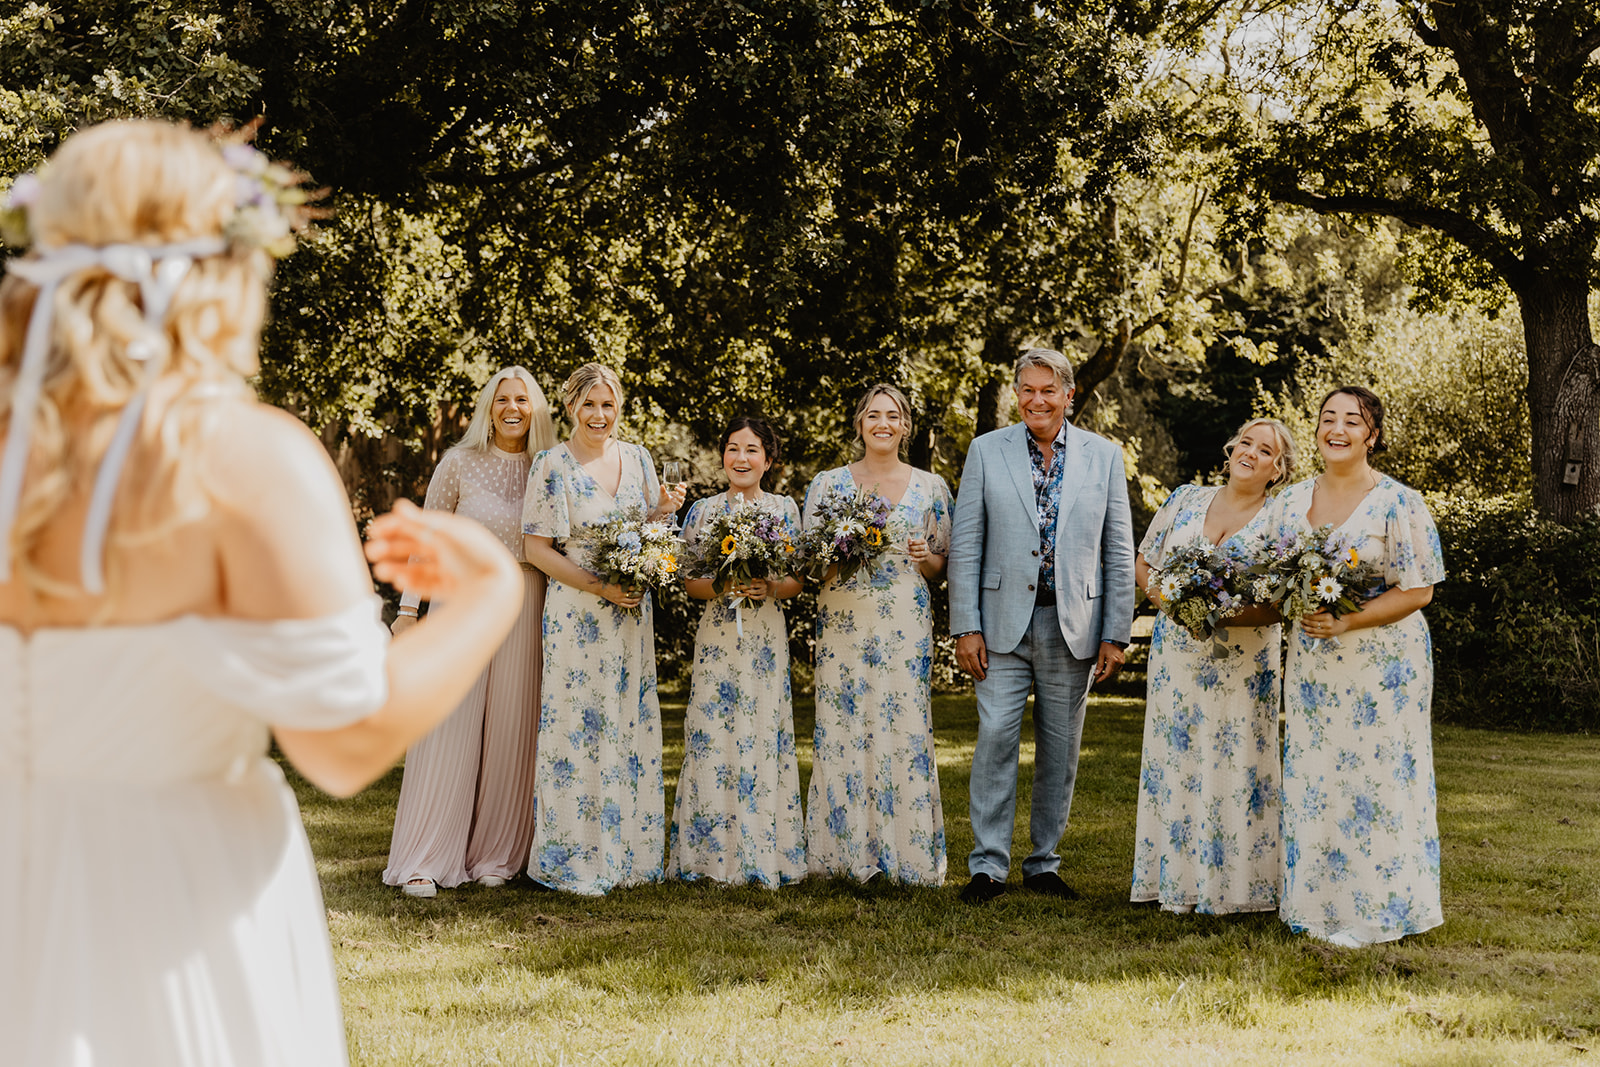 Bride and bridesmaids at a wedding at Mac's Farm in Sussex. By OliveJoy Photography.